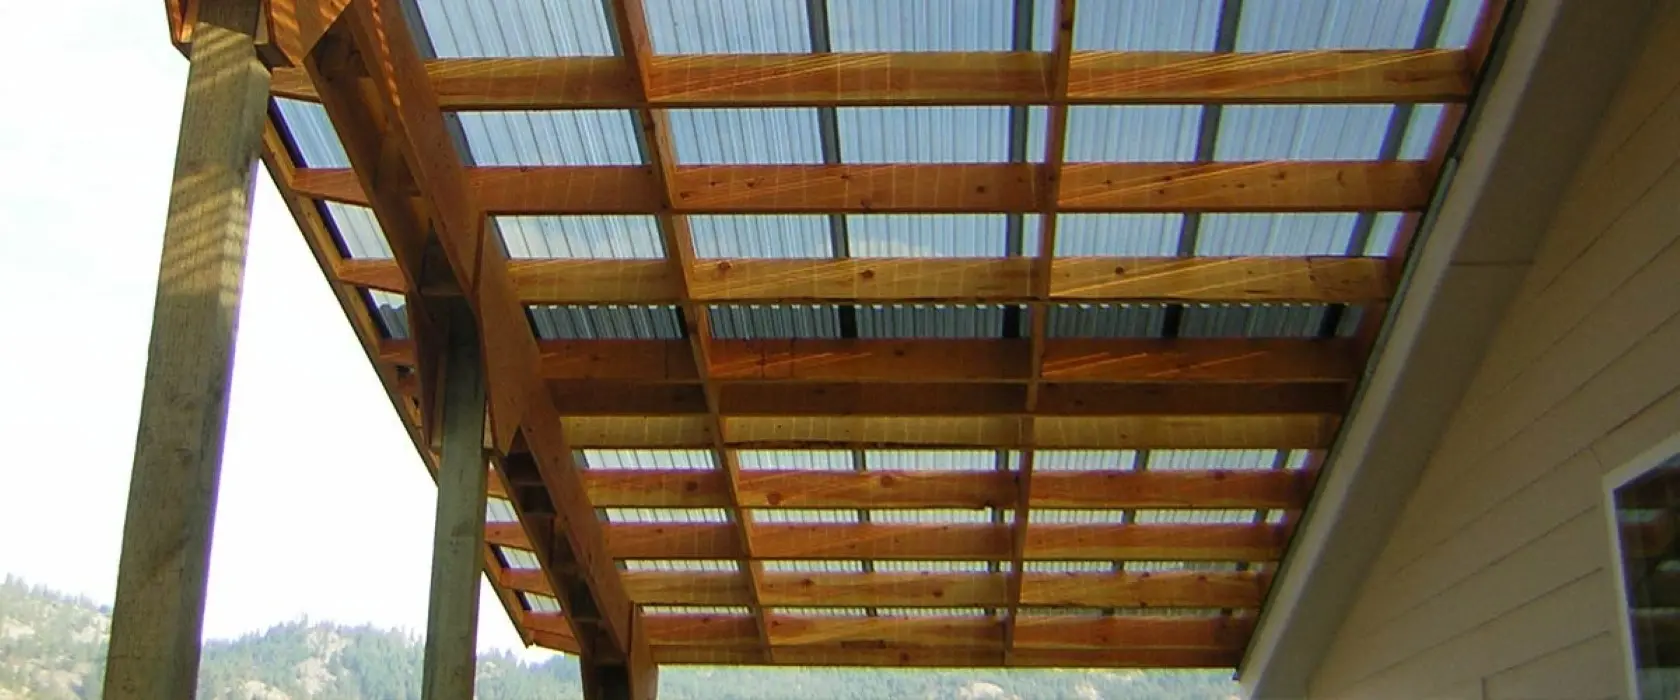 smoked corrugated plastic roofing - What is plastic corrugated roofing called